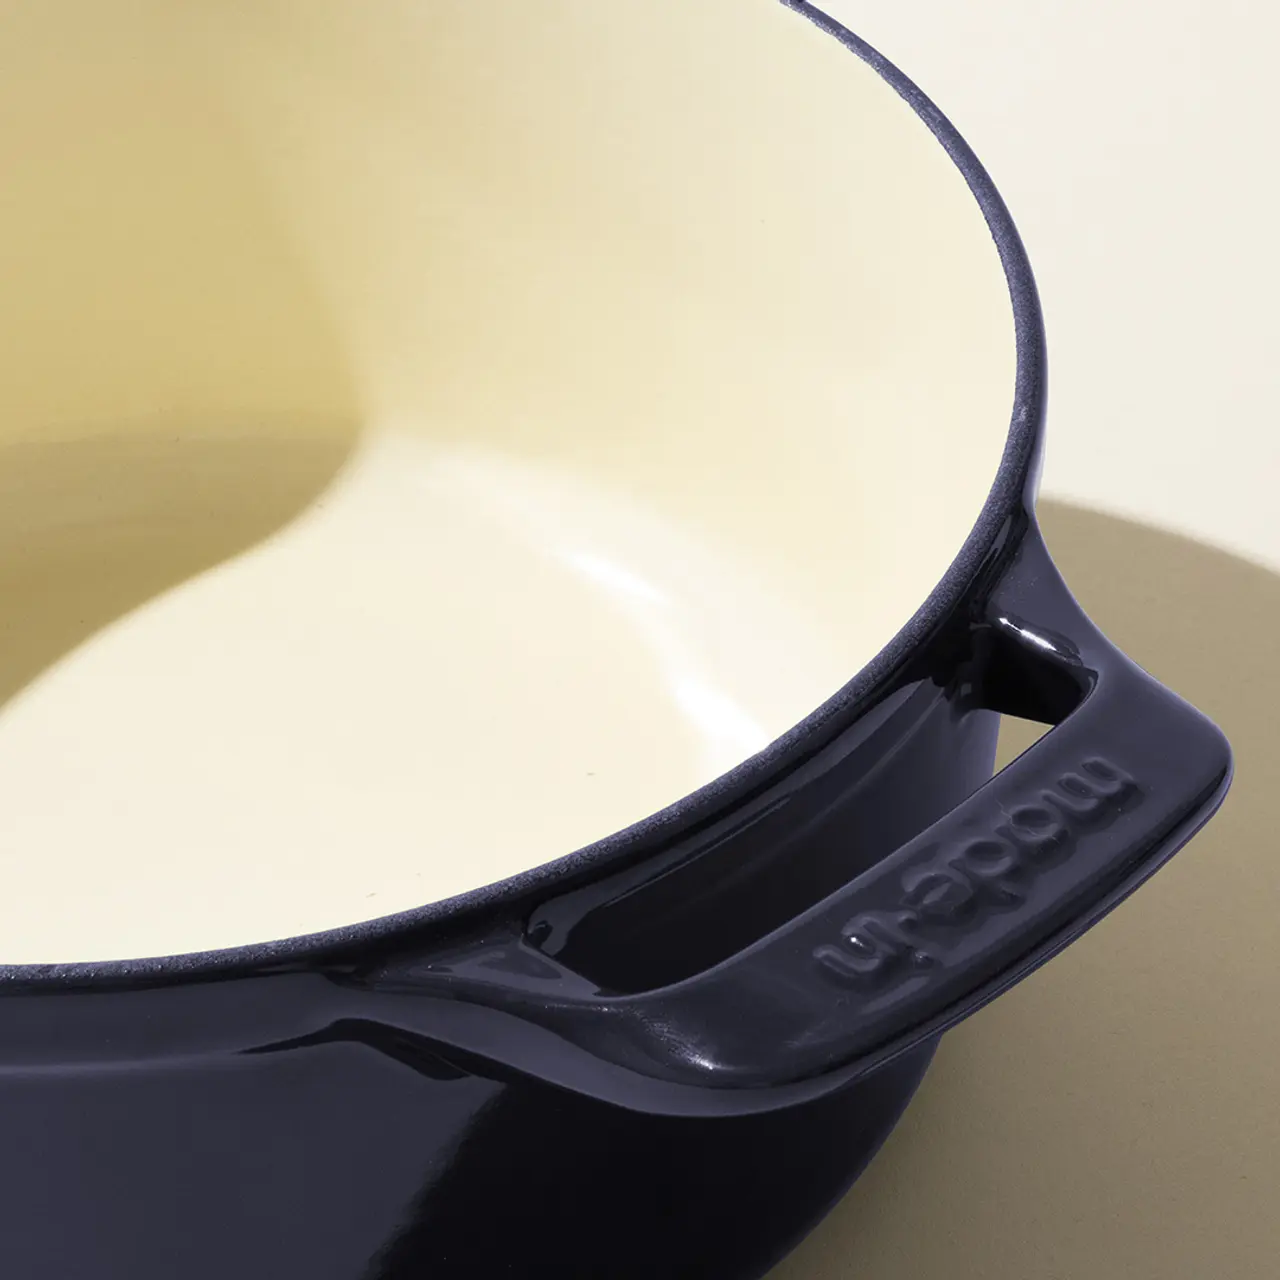 A close-up of a black and cream-colored Le Creuset pot showing the spout and brand name embossed on the handle.